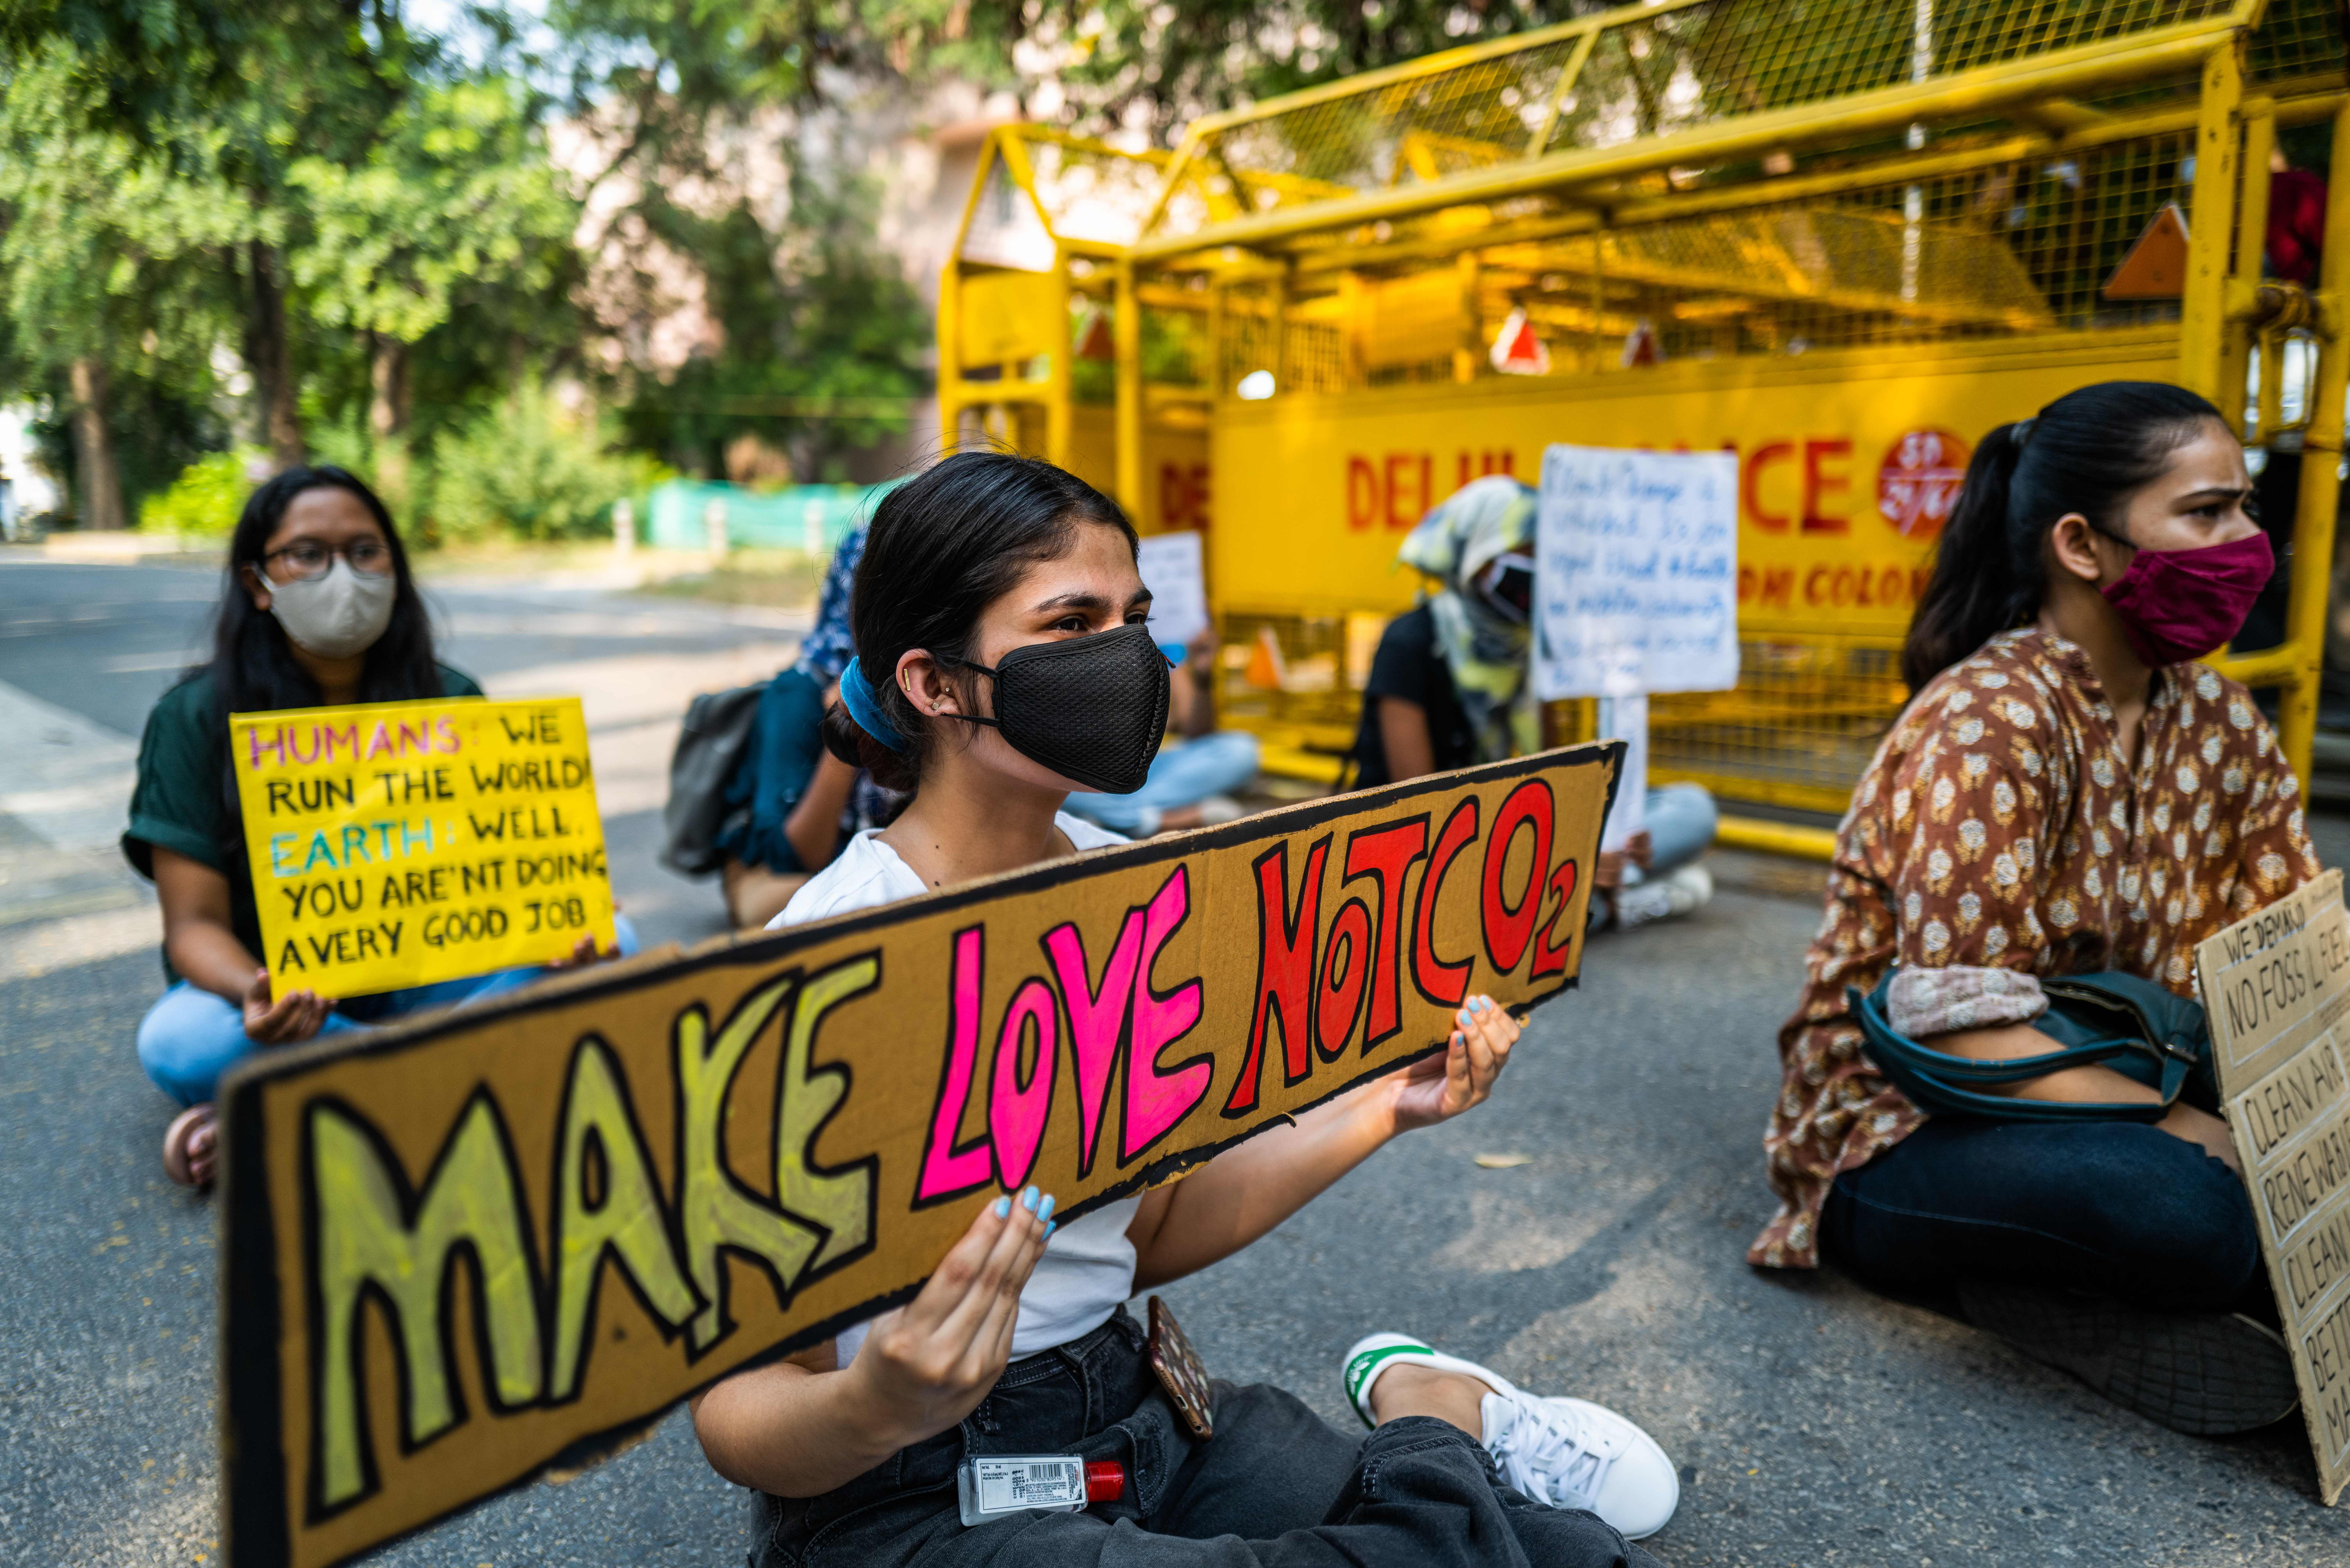 Fridays for Future Delhi protesters take part in the global climate strike in September